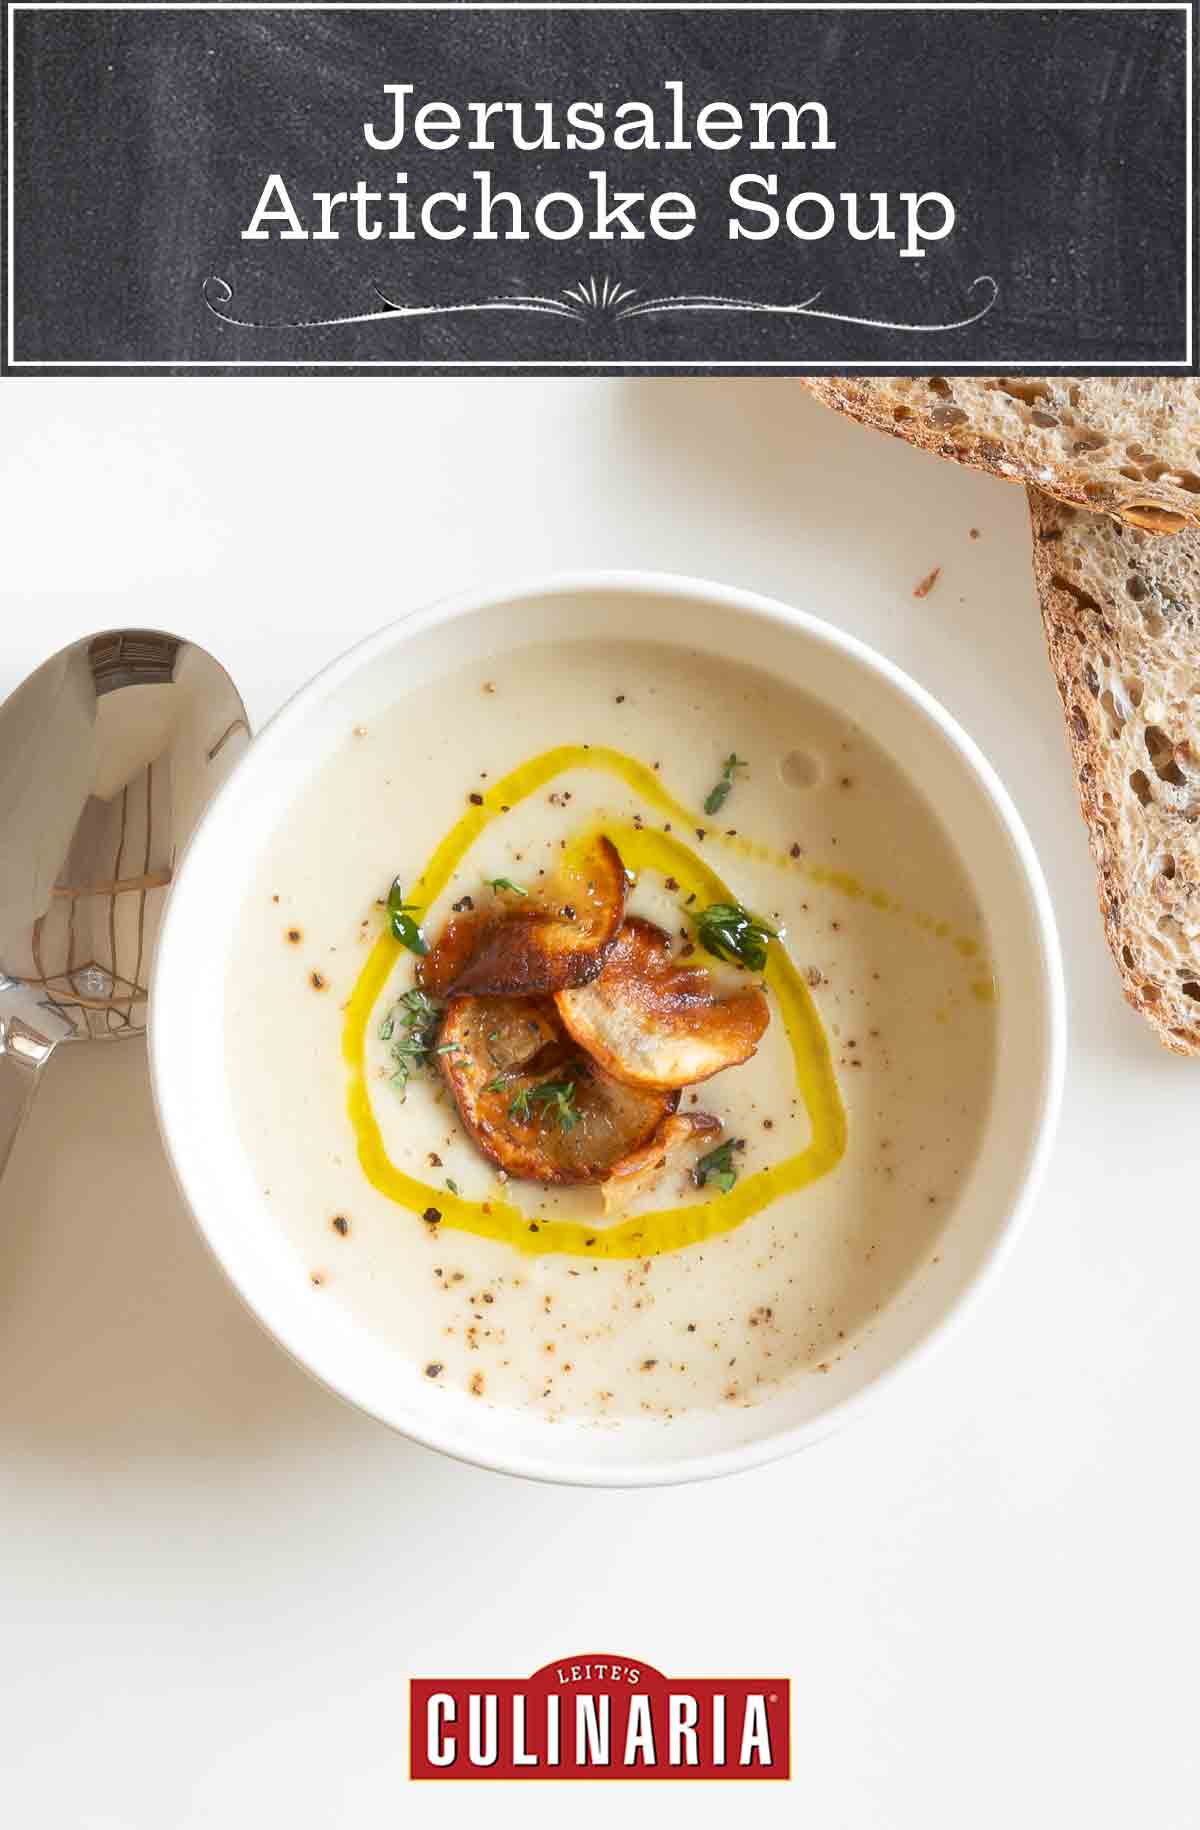 A white plate with a soup spoon and 2 slices of grainy bread, with a small white bowl filled with Jerusalem artichoke soup garnished with thyme, truffle oil, and Jerusalem artichoke chips.